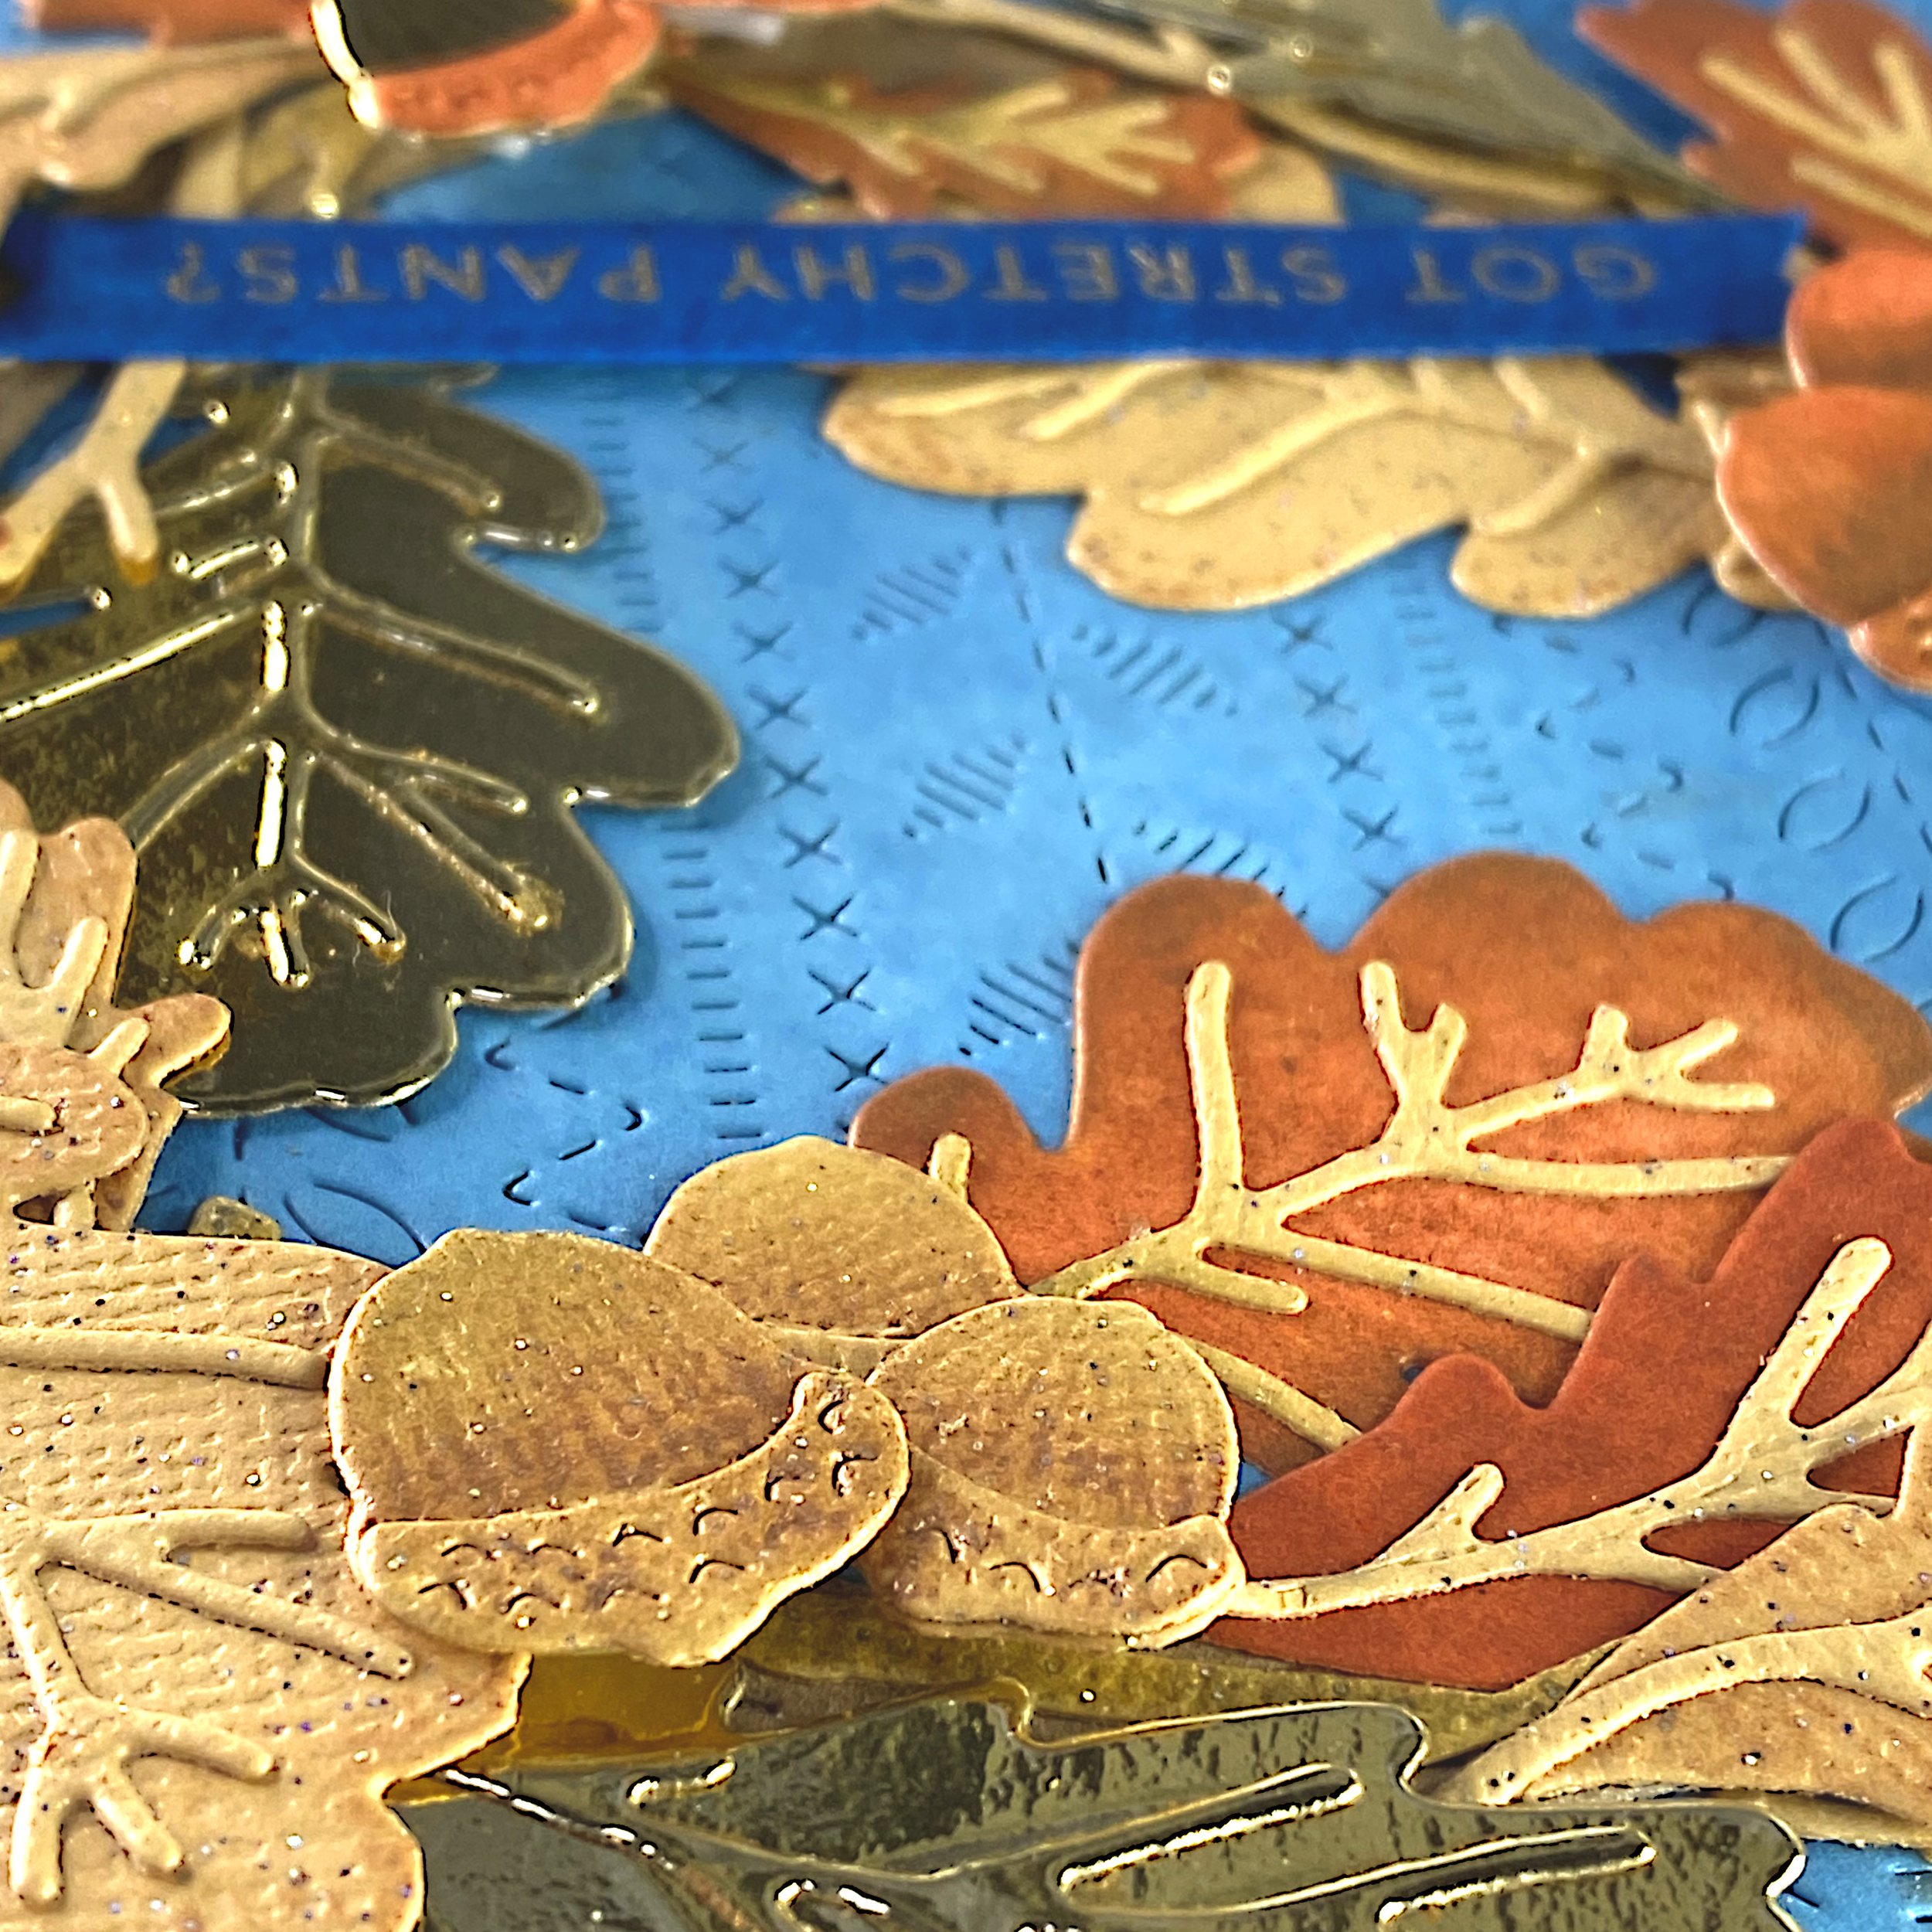 A greeting card with a wreath made out of oak leaves